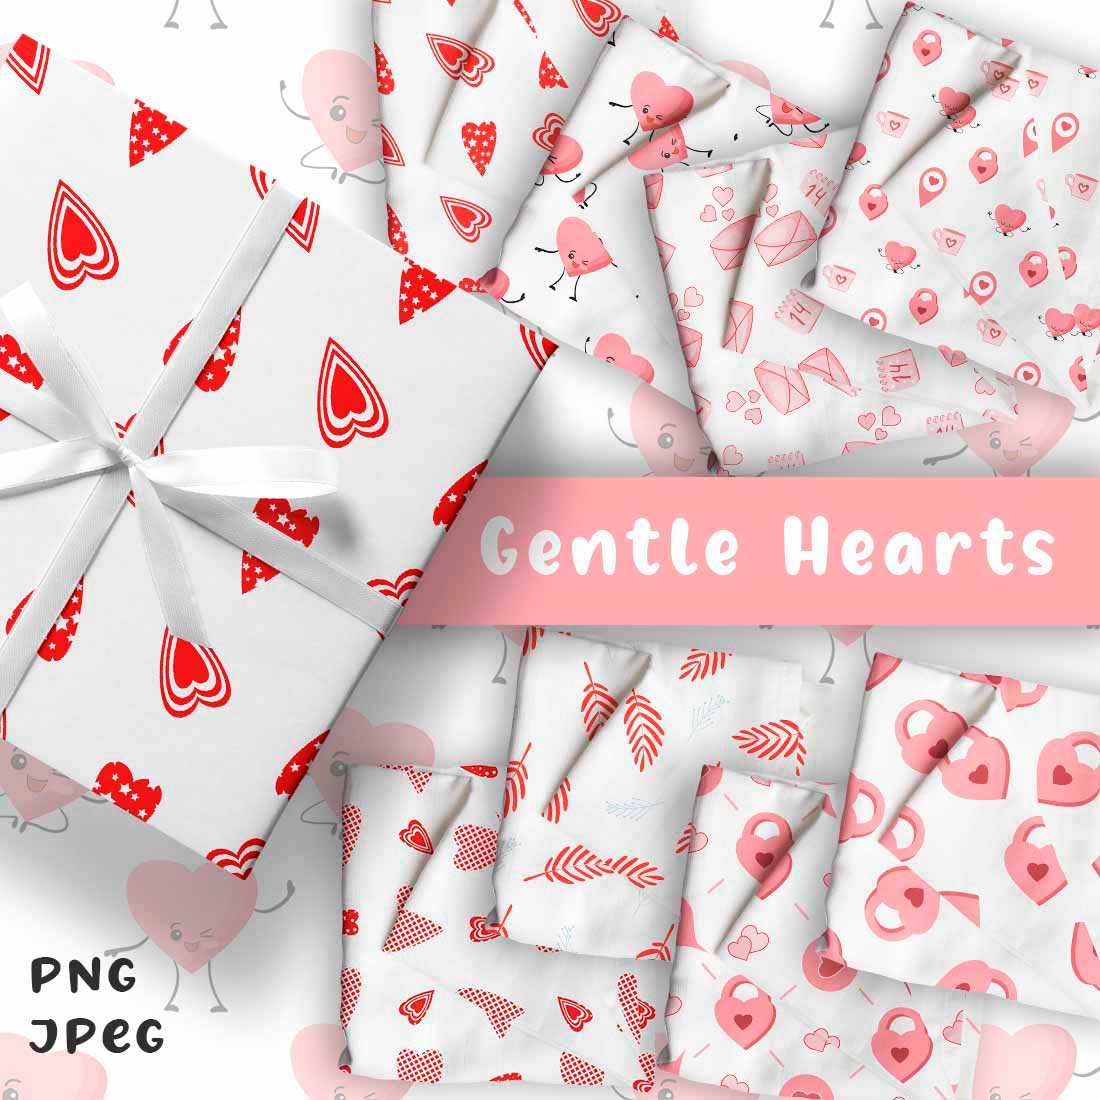 Pack of images of colorful patterns with hearts.